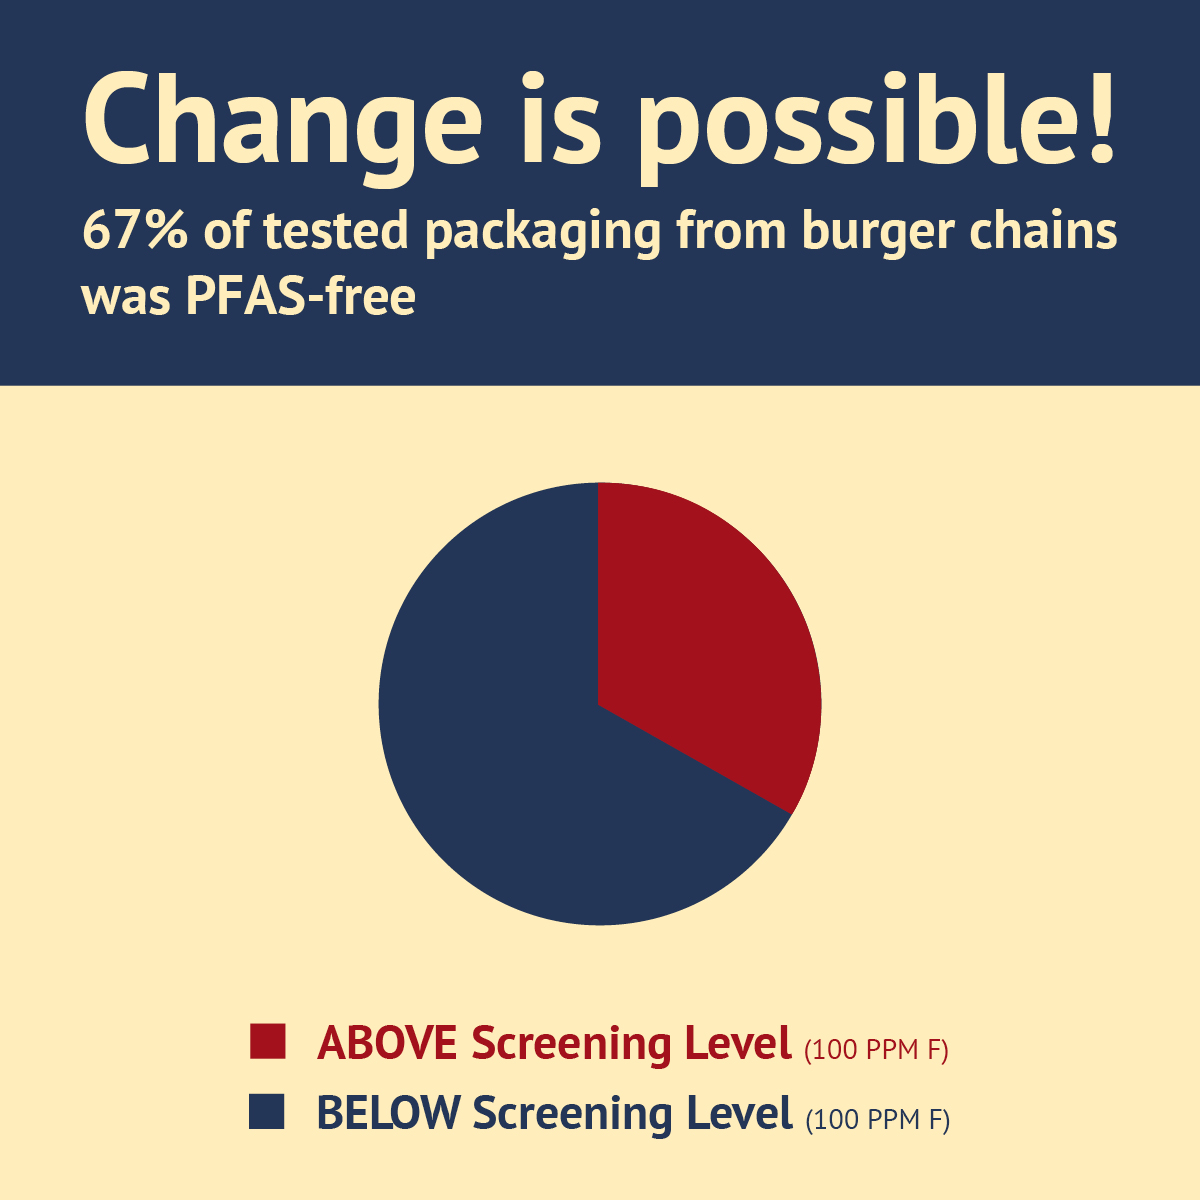 Change is possible - 67% of tested packaging from burger chains was PFAS-free